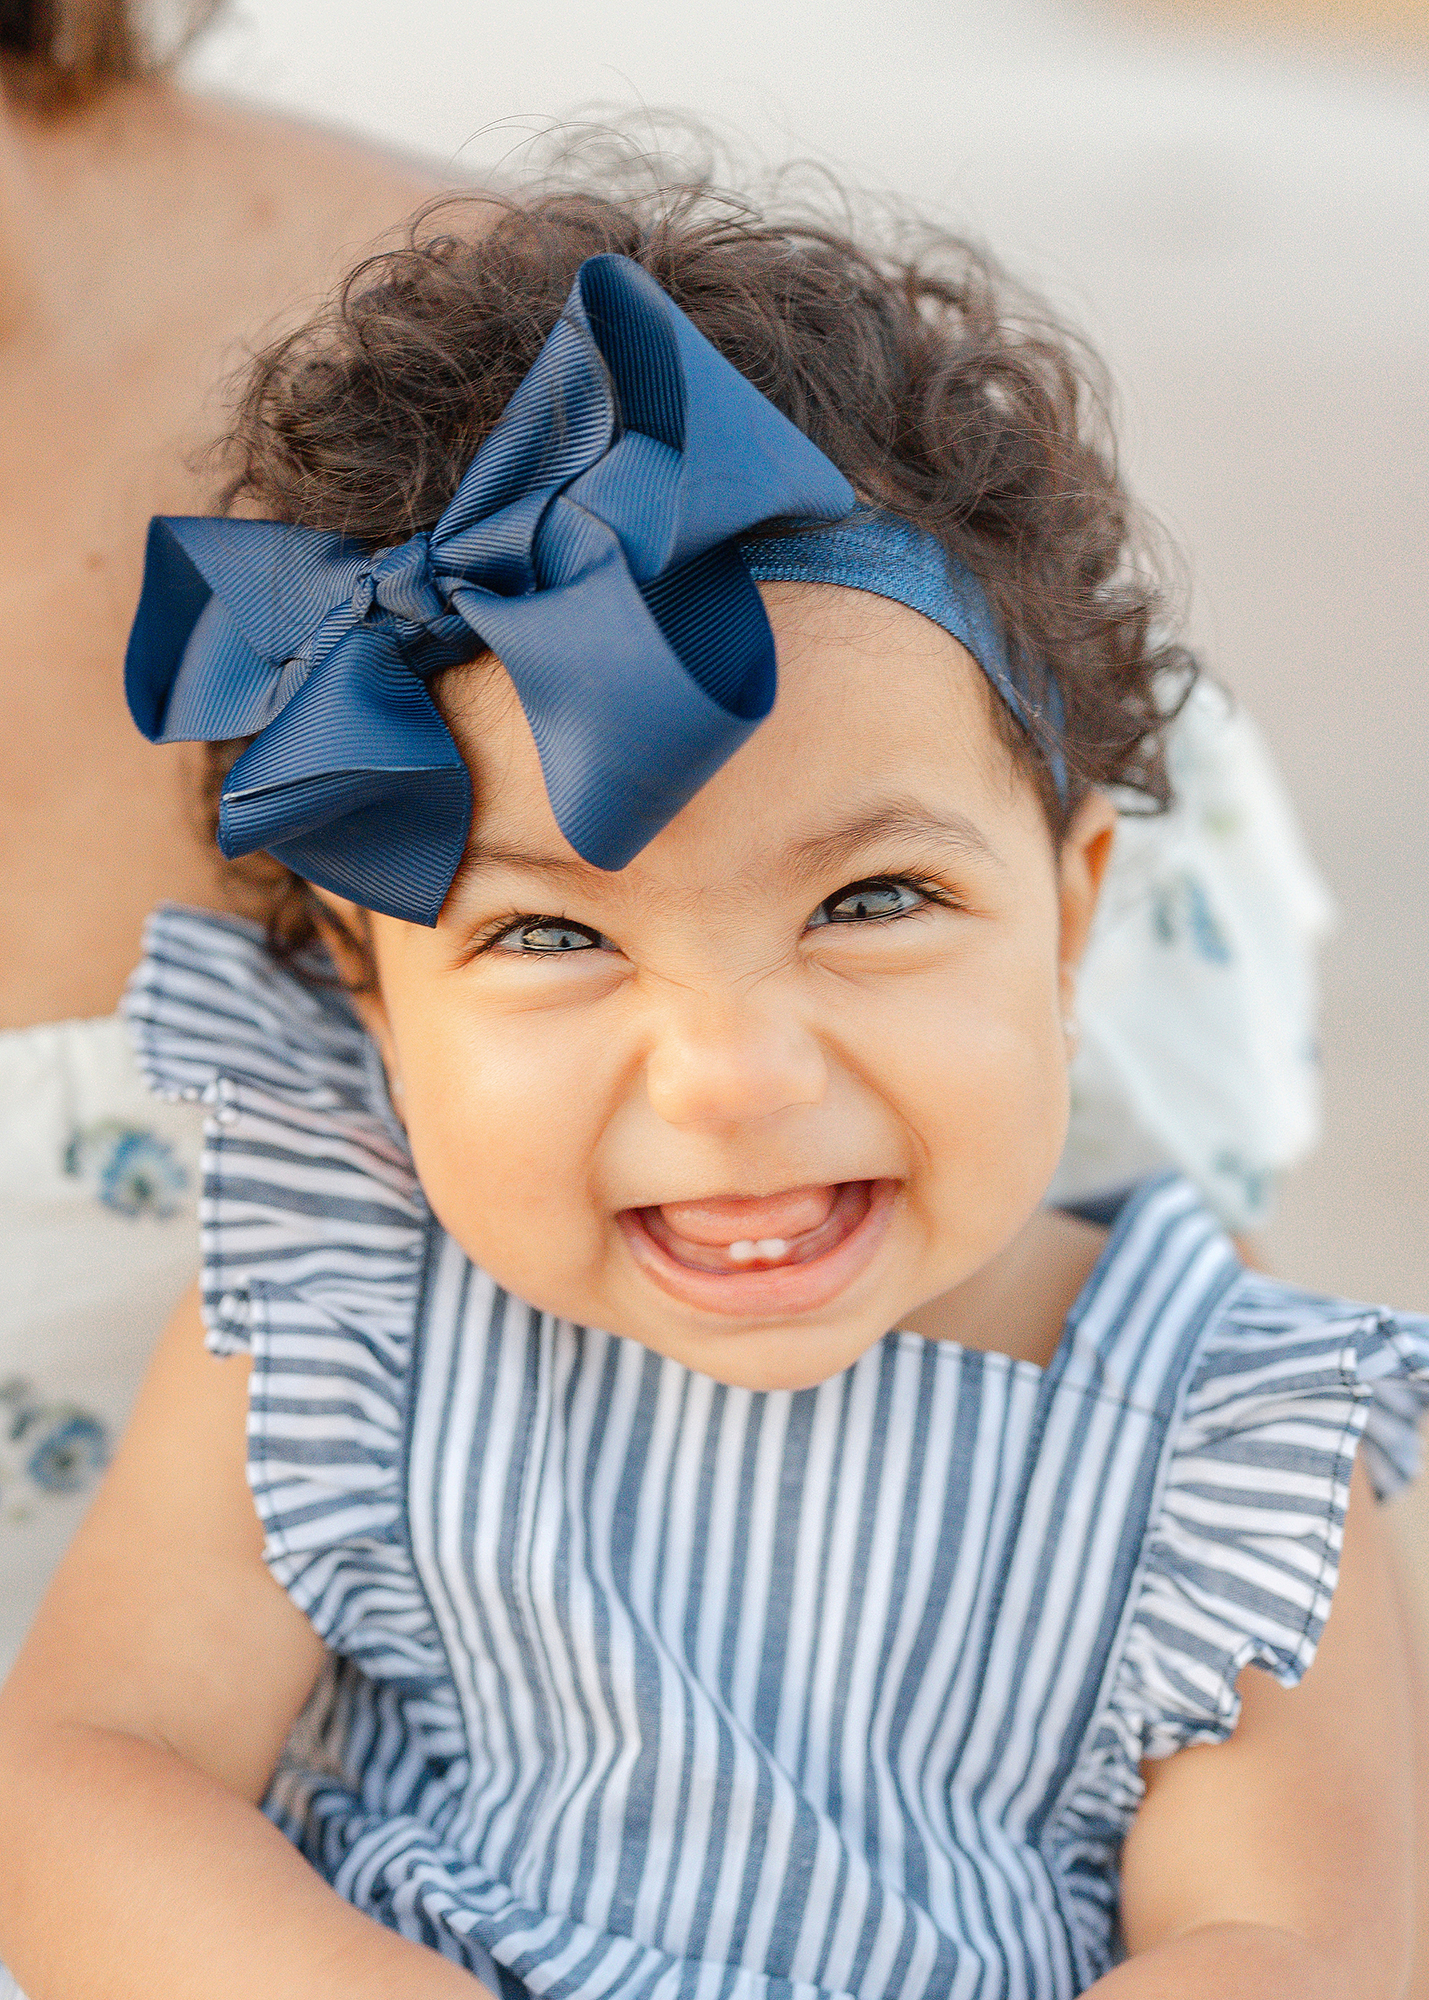 A smiling baby girl with two teeth in a blue and white striped romper with navy bow.